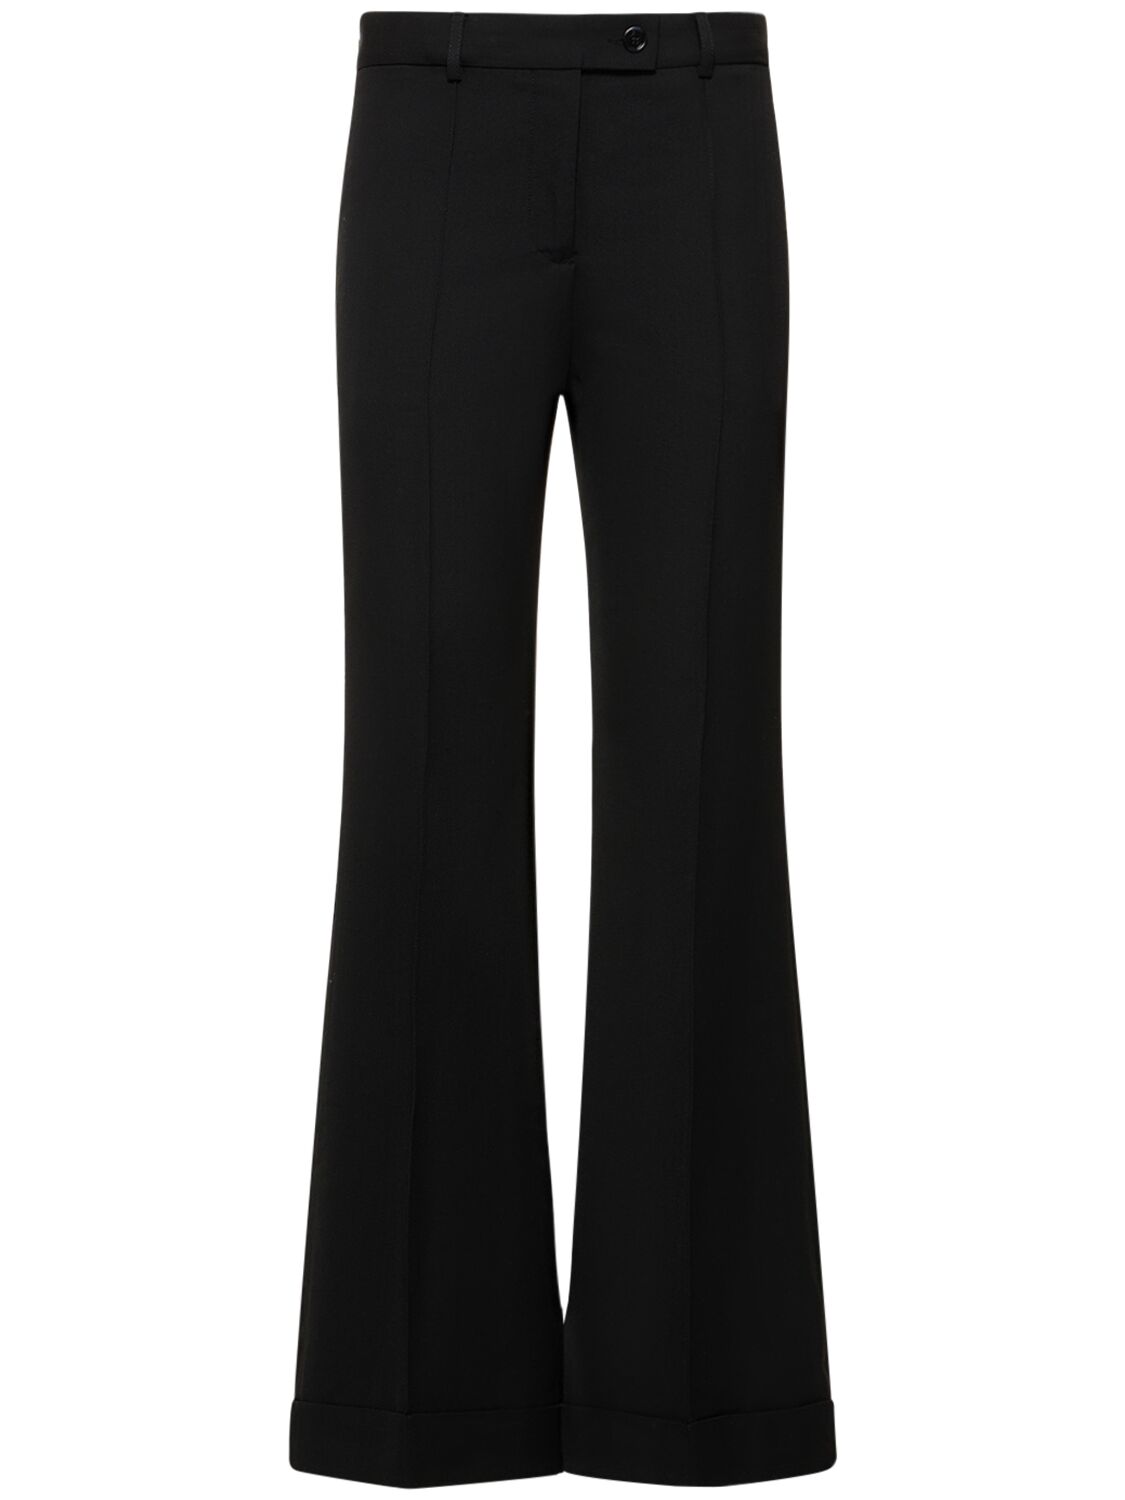 Tailored Wool Blend Crepe Flared Pants